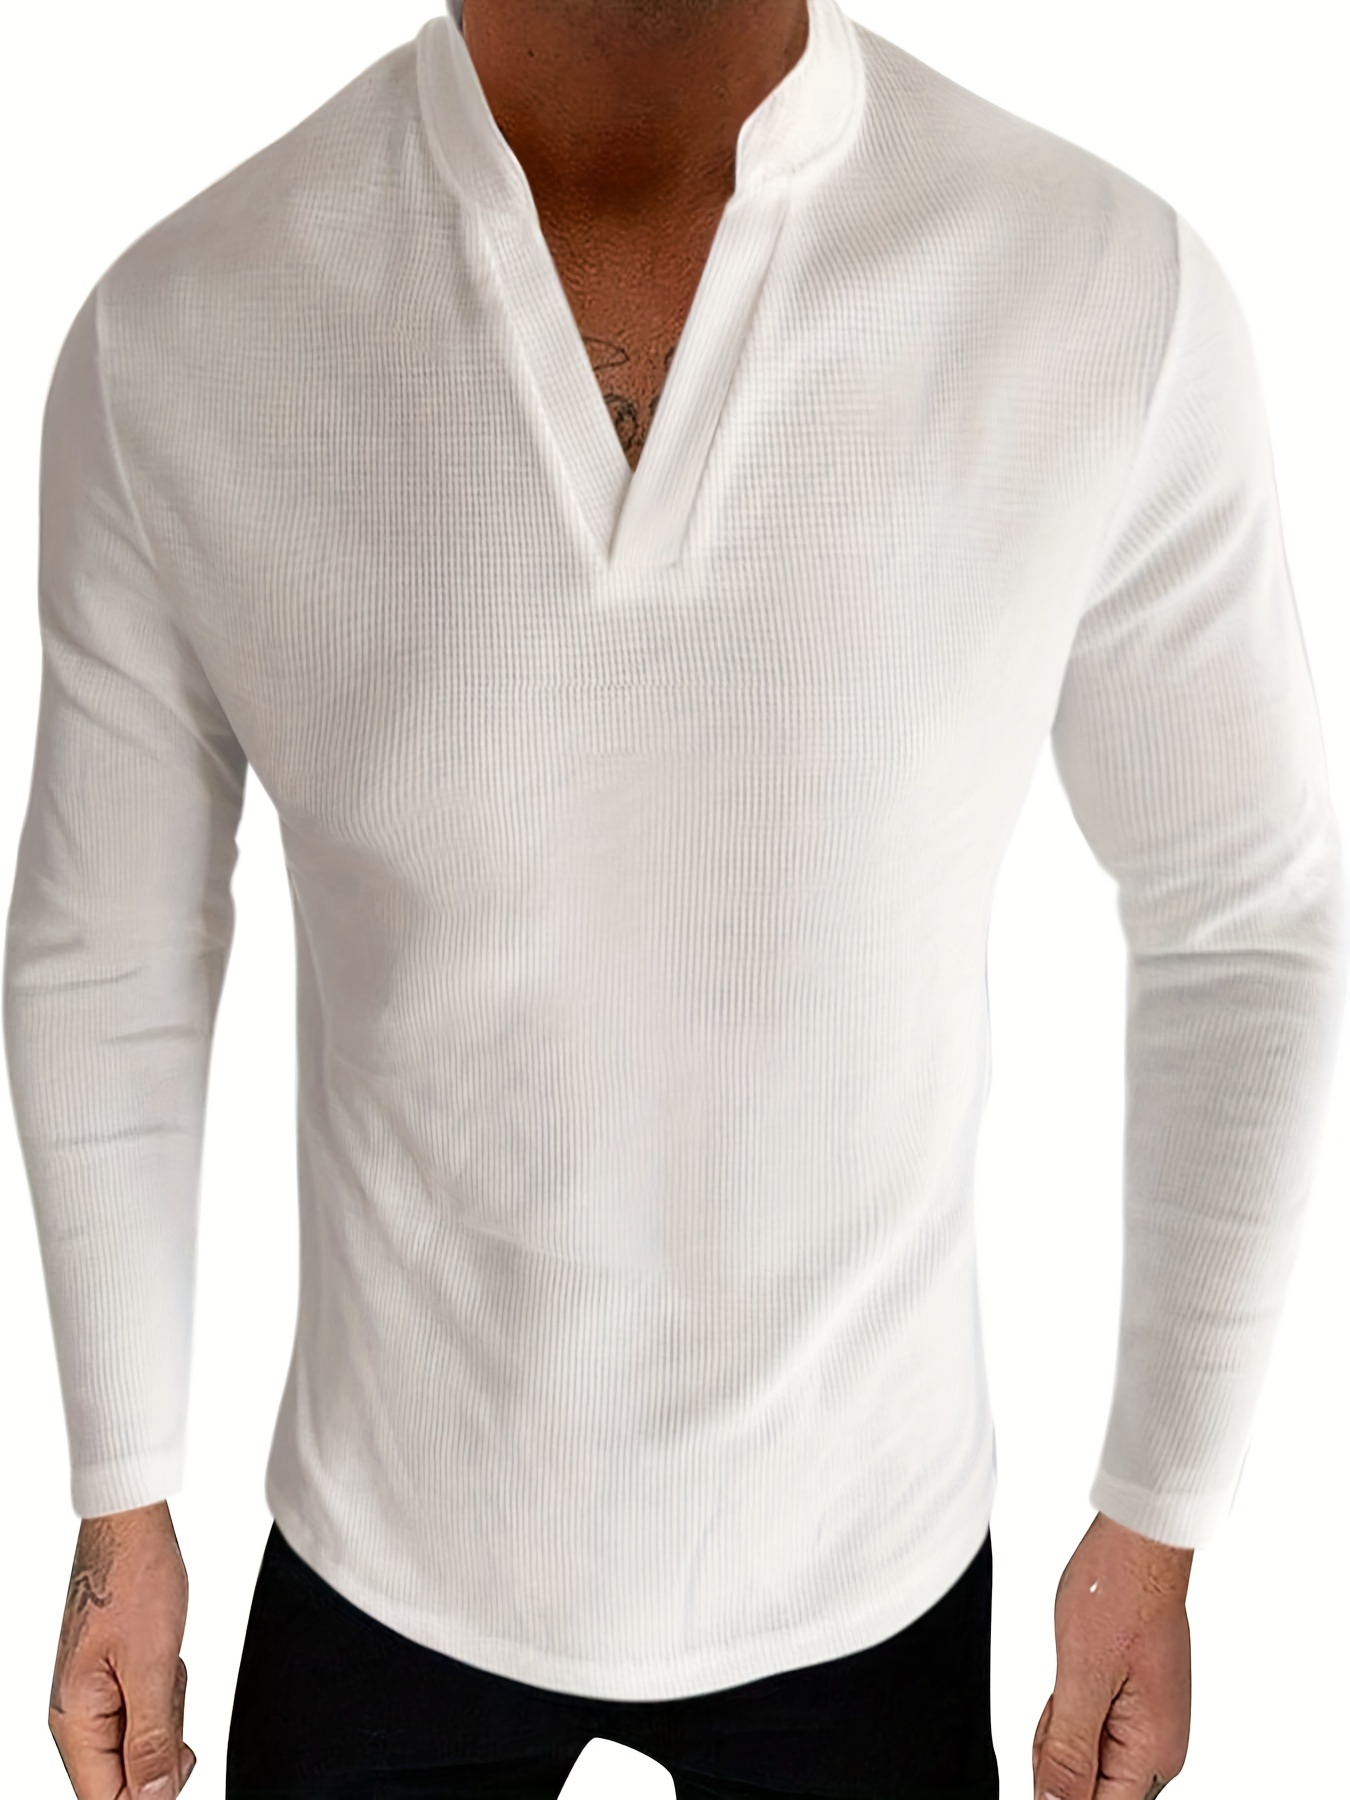 Men's Long Sleeve T Shirt Solid Color V Neck T Shirt Sports Casual